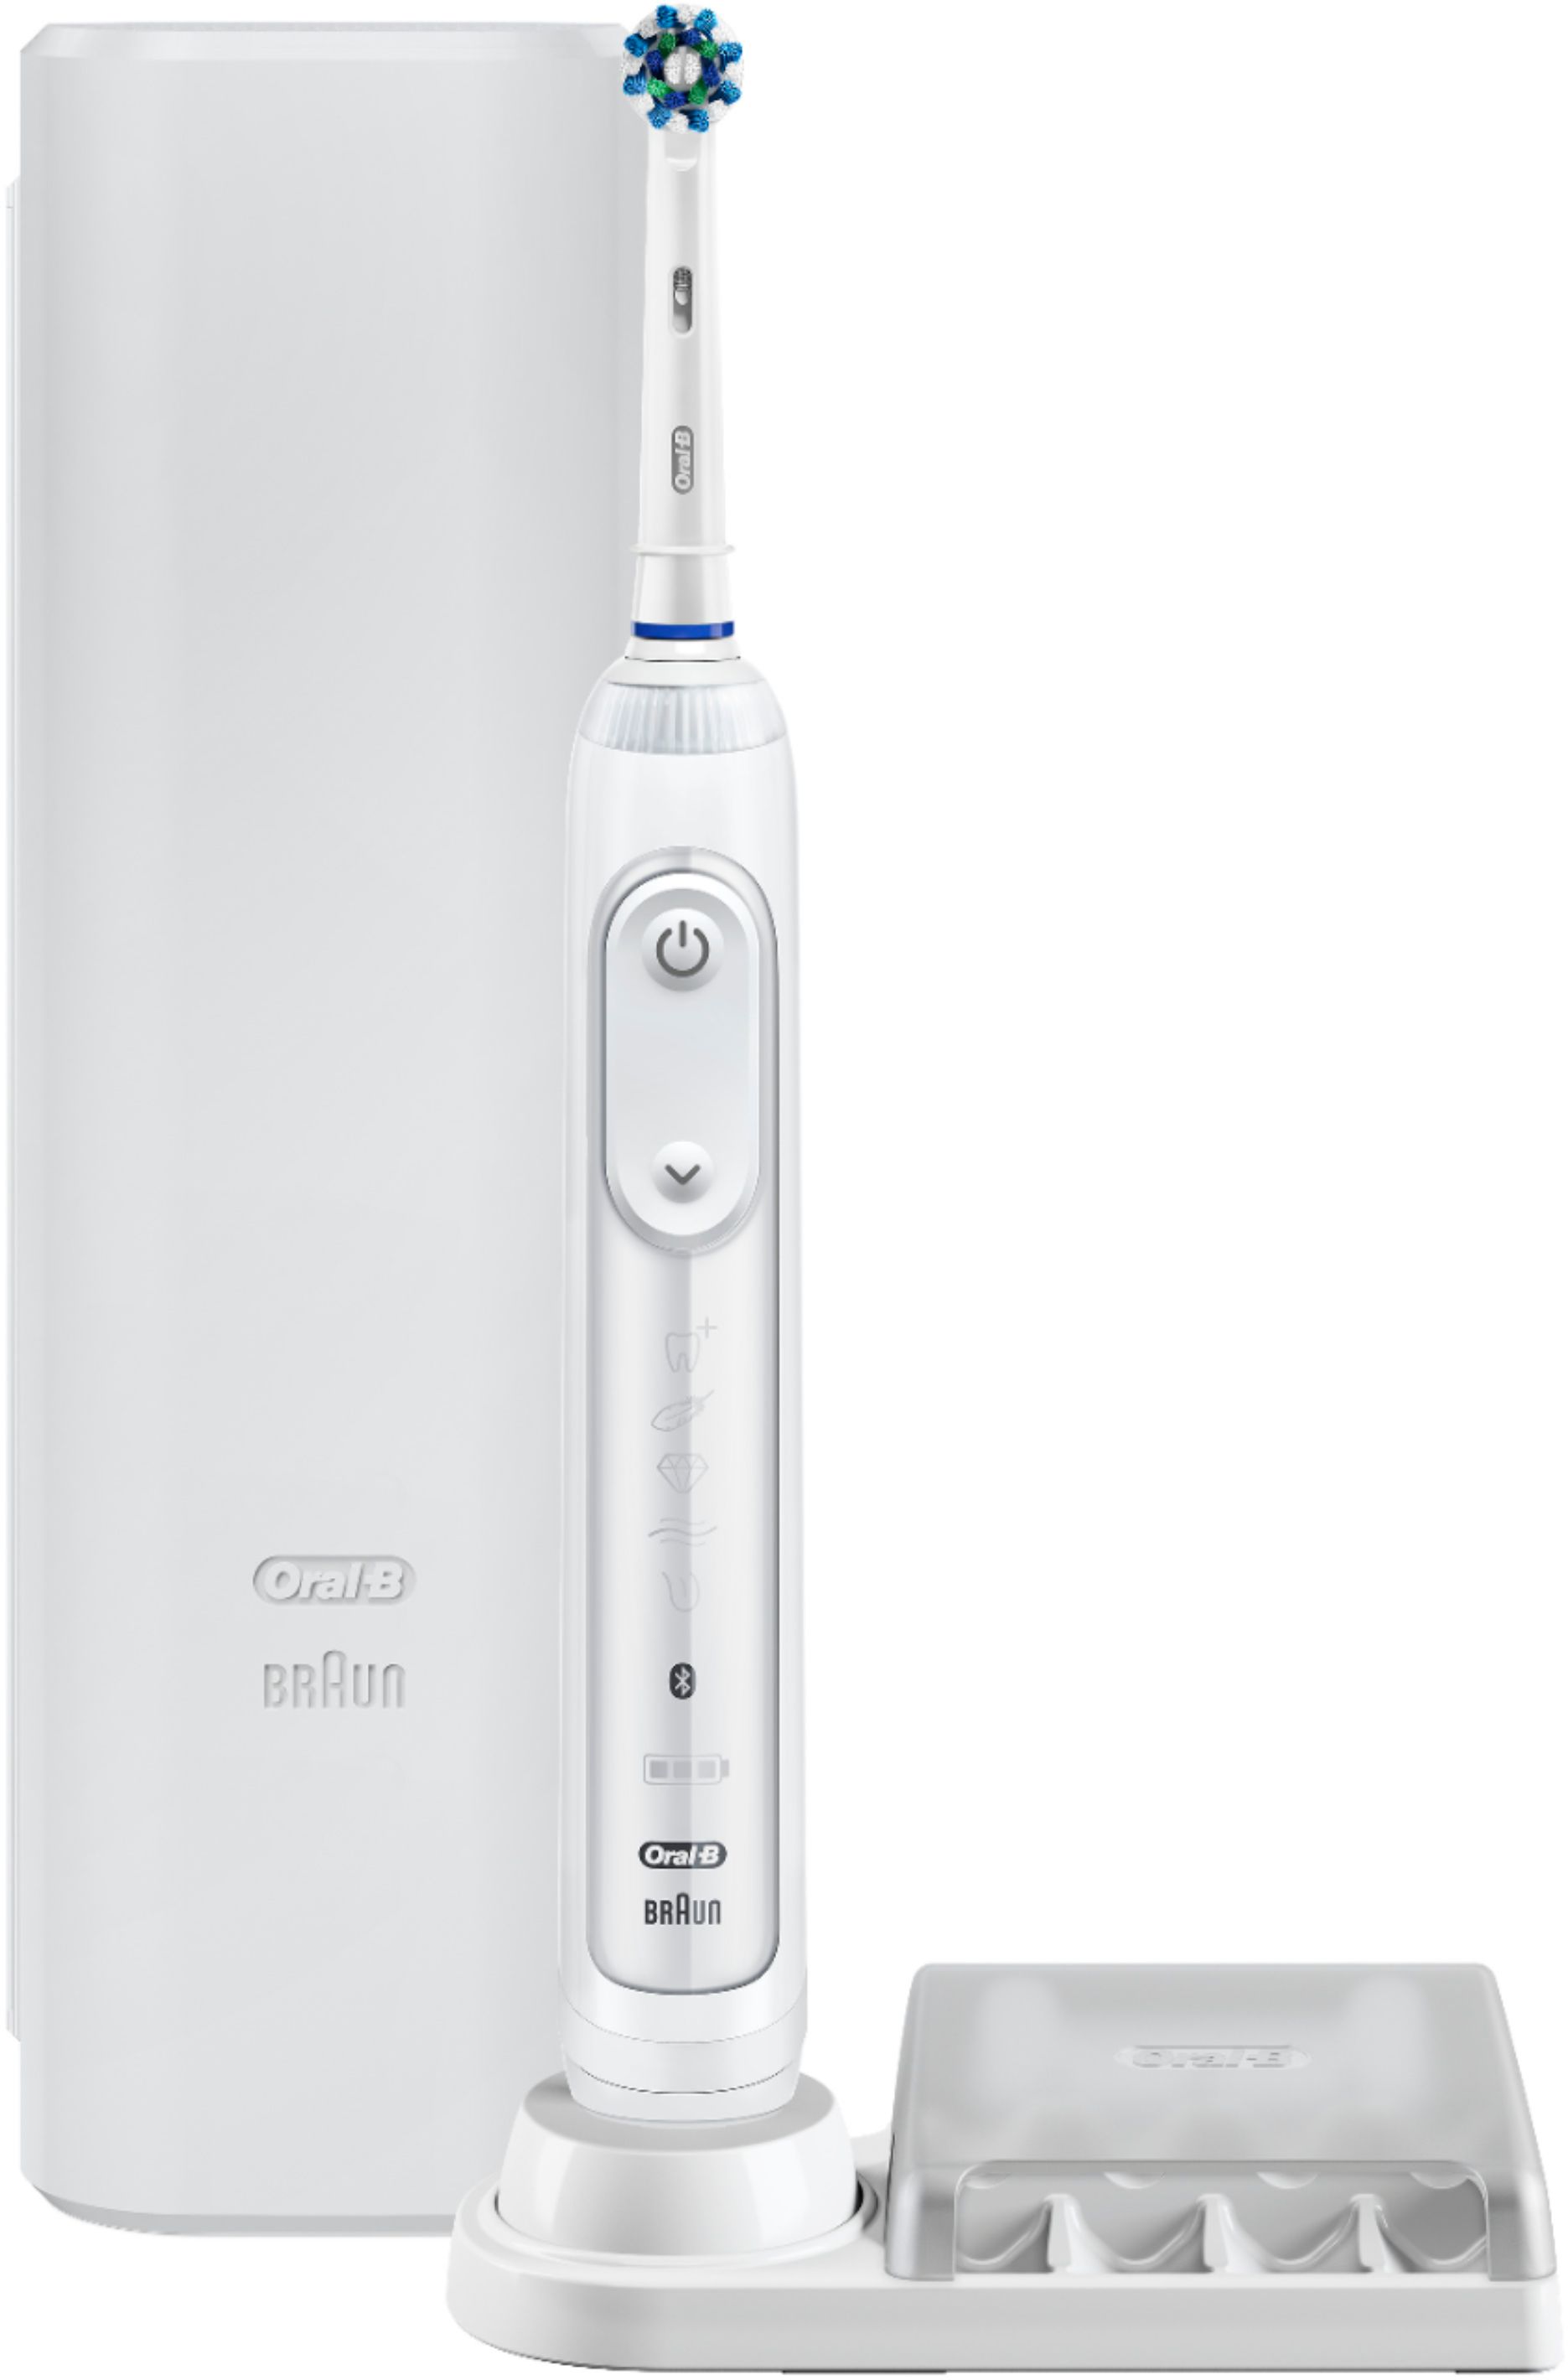 Oral-B - SmartSeries Pro 6000 Connected Electric Toothbrush - White